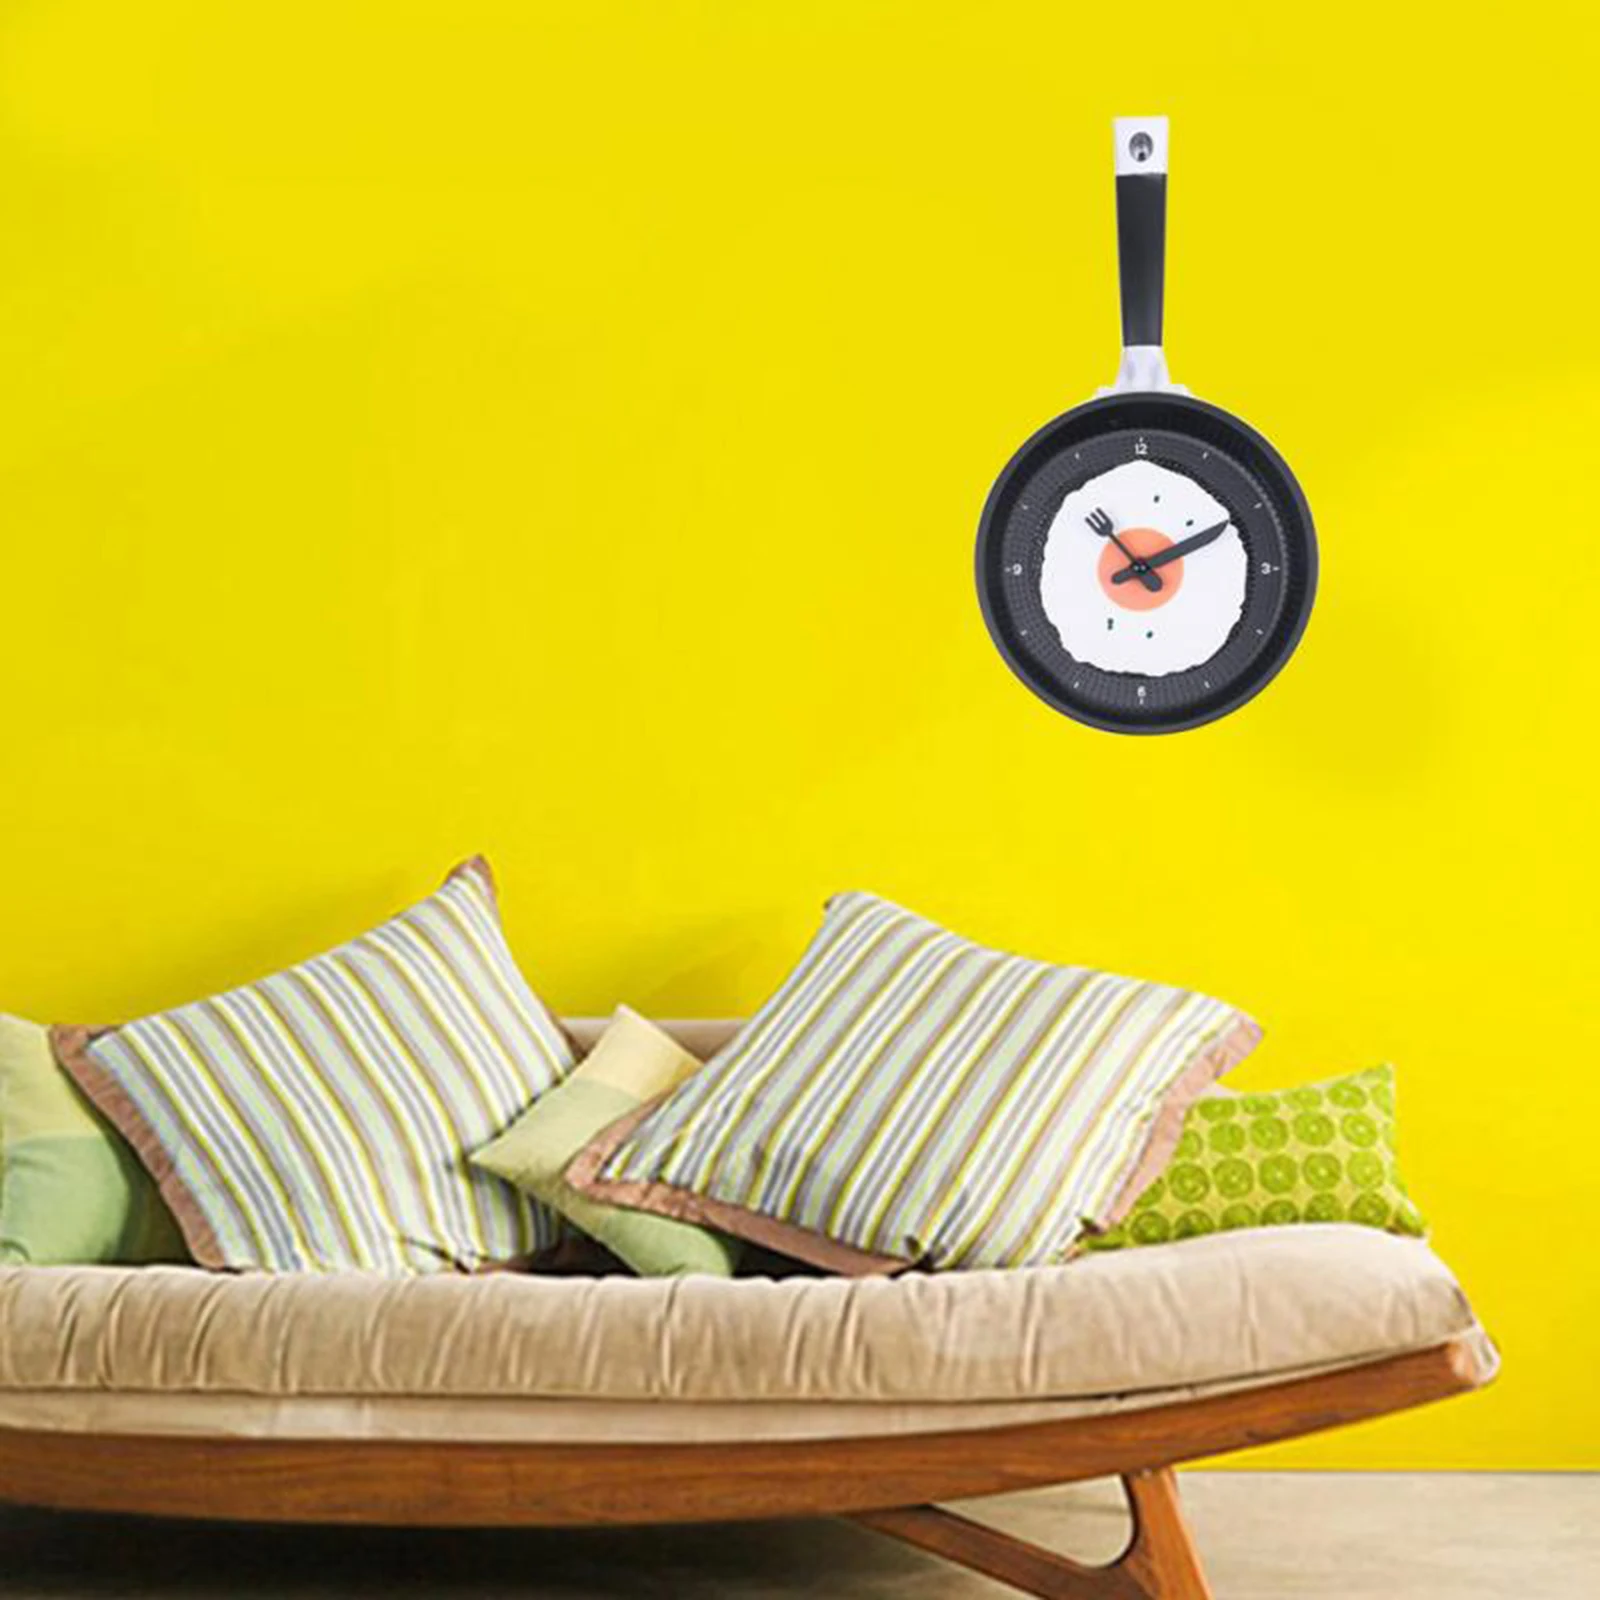 Details about   Novelty Frying Pan Shaped with Fried Egg Silent Wall Clock Room Decoration 